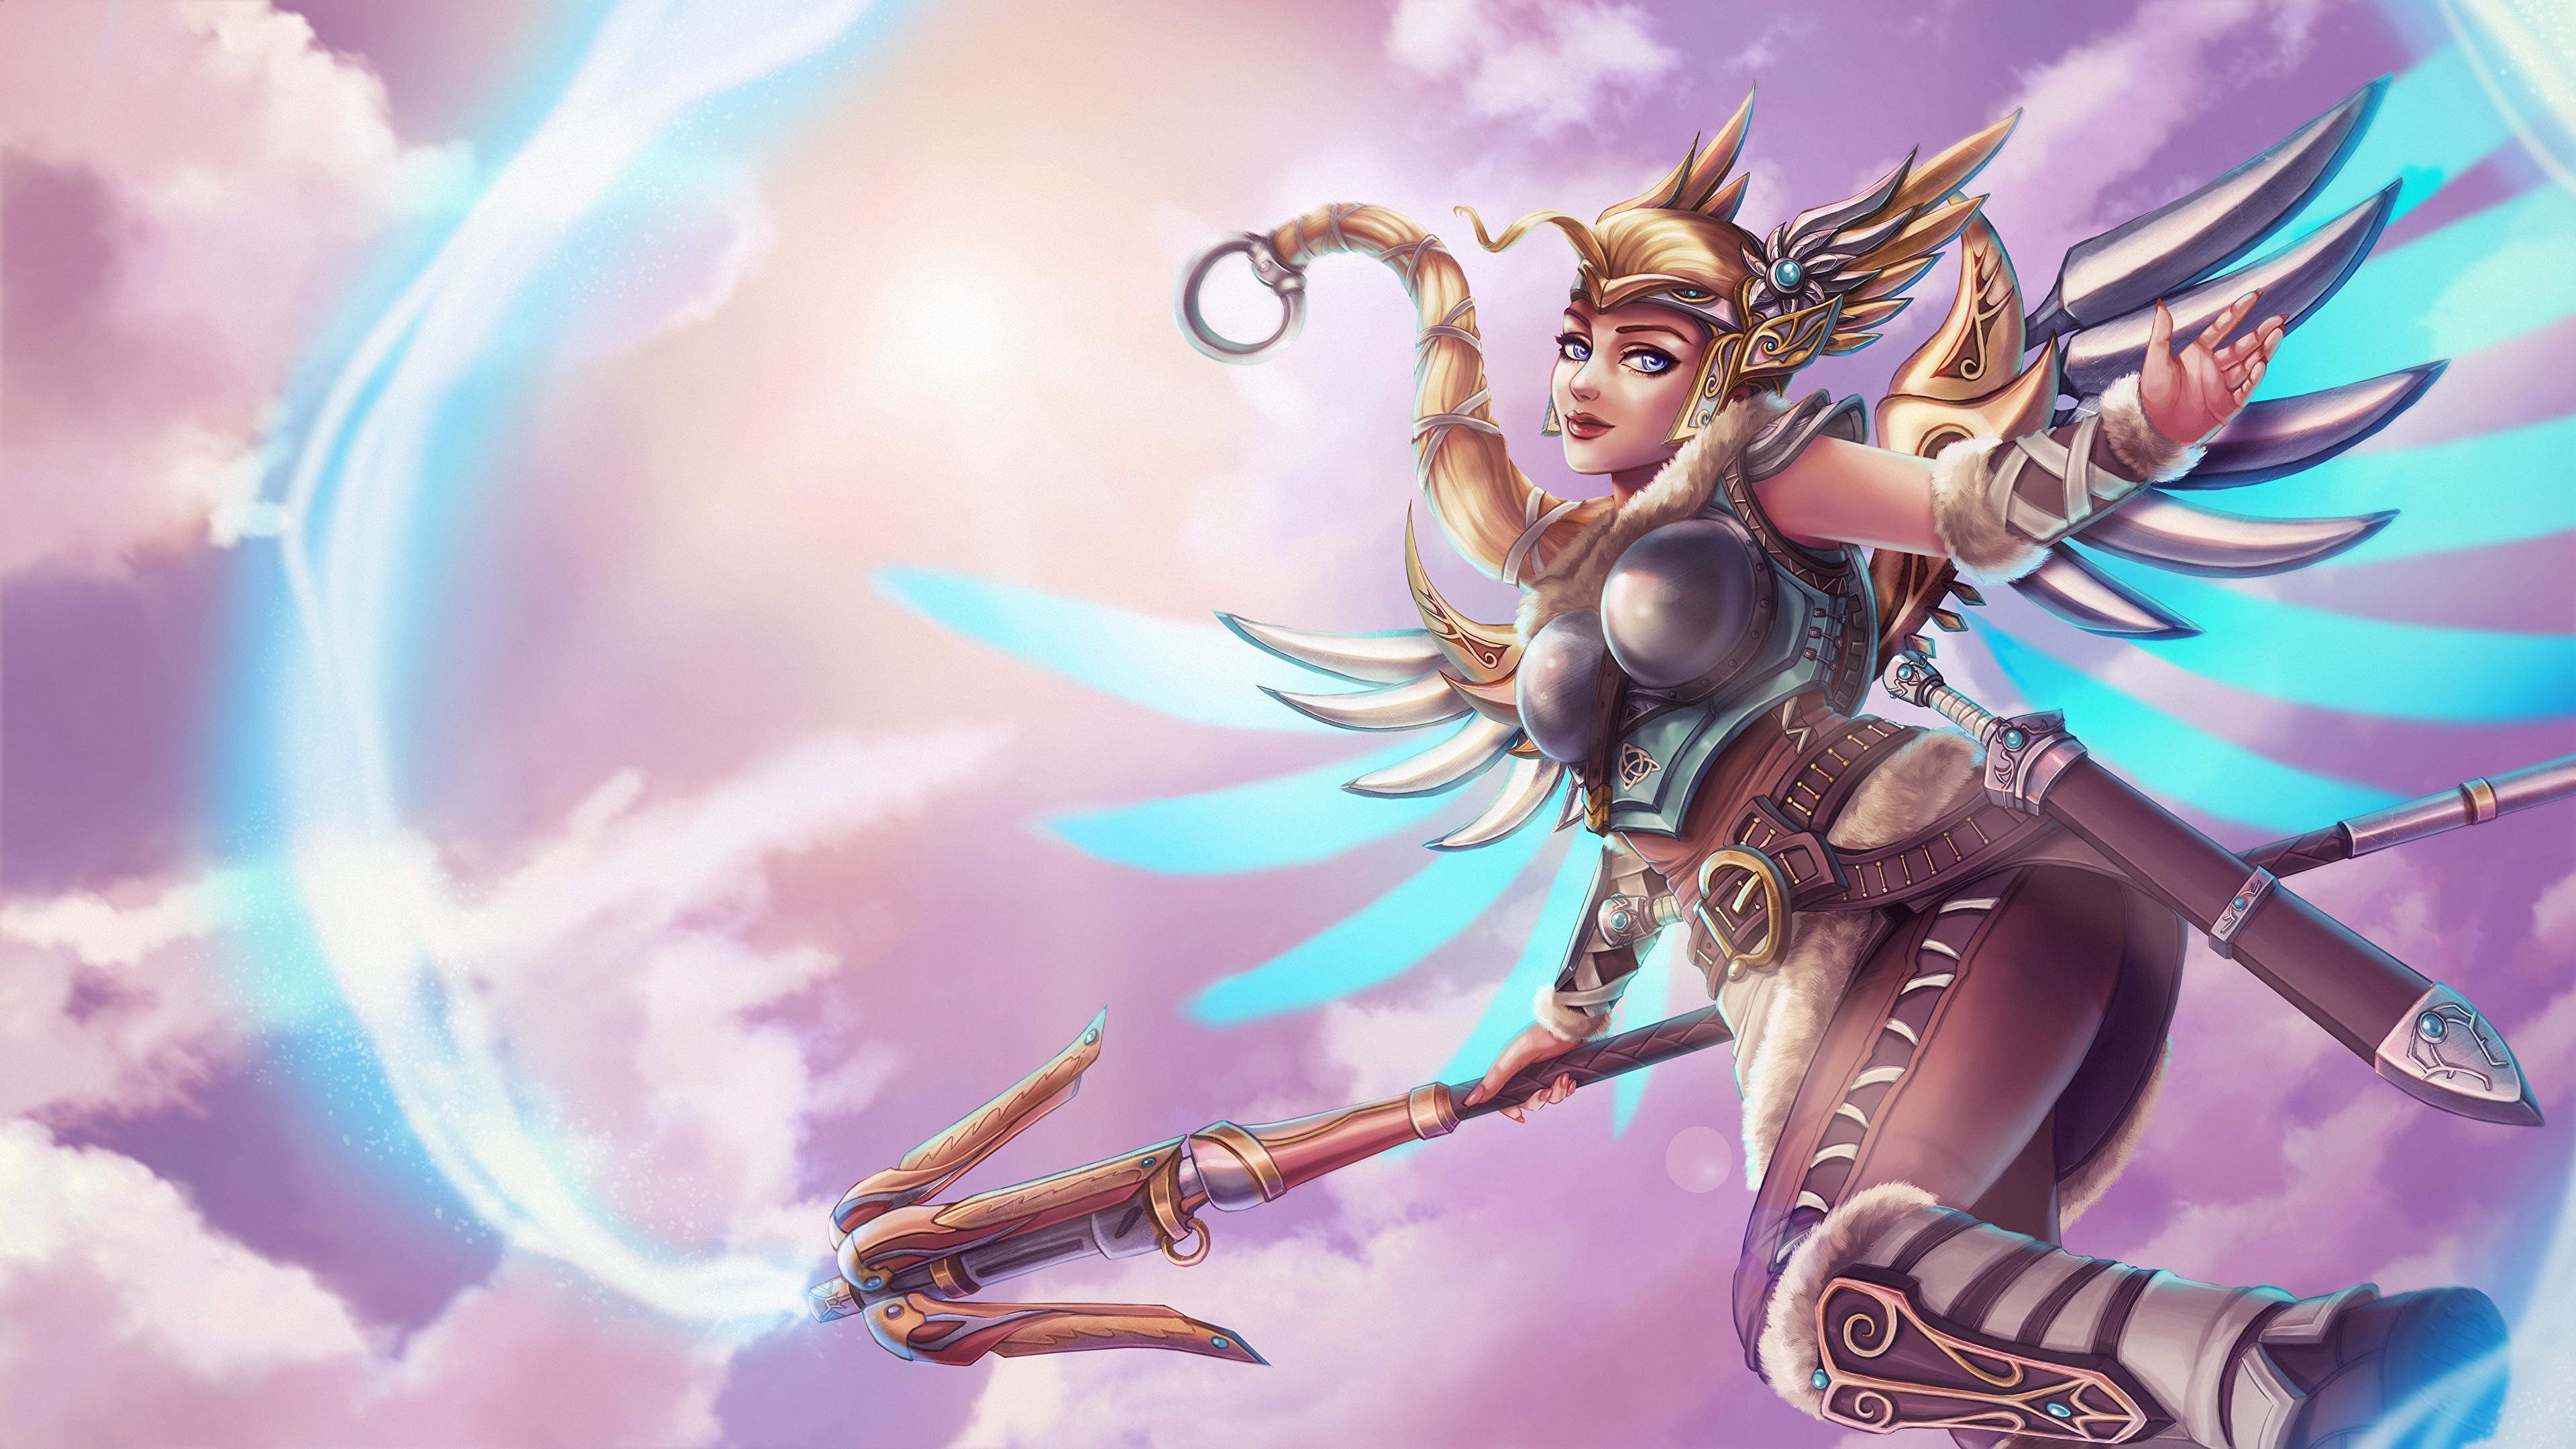 Picture Overwatch Mage Staff Fan ART Mercy, Valkyrie 3840x2160